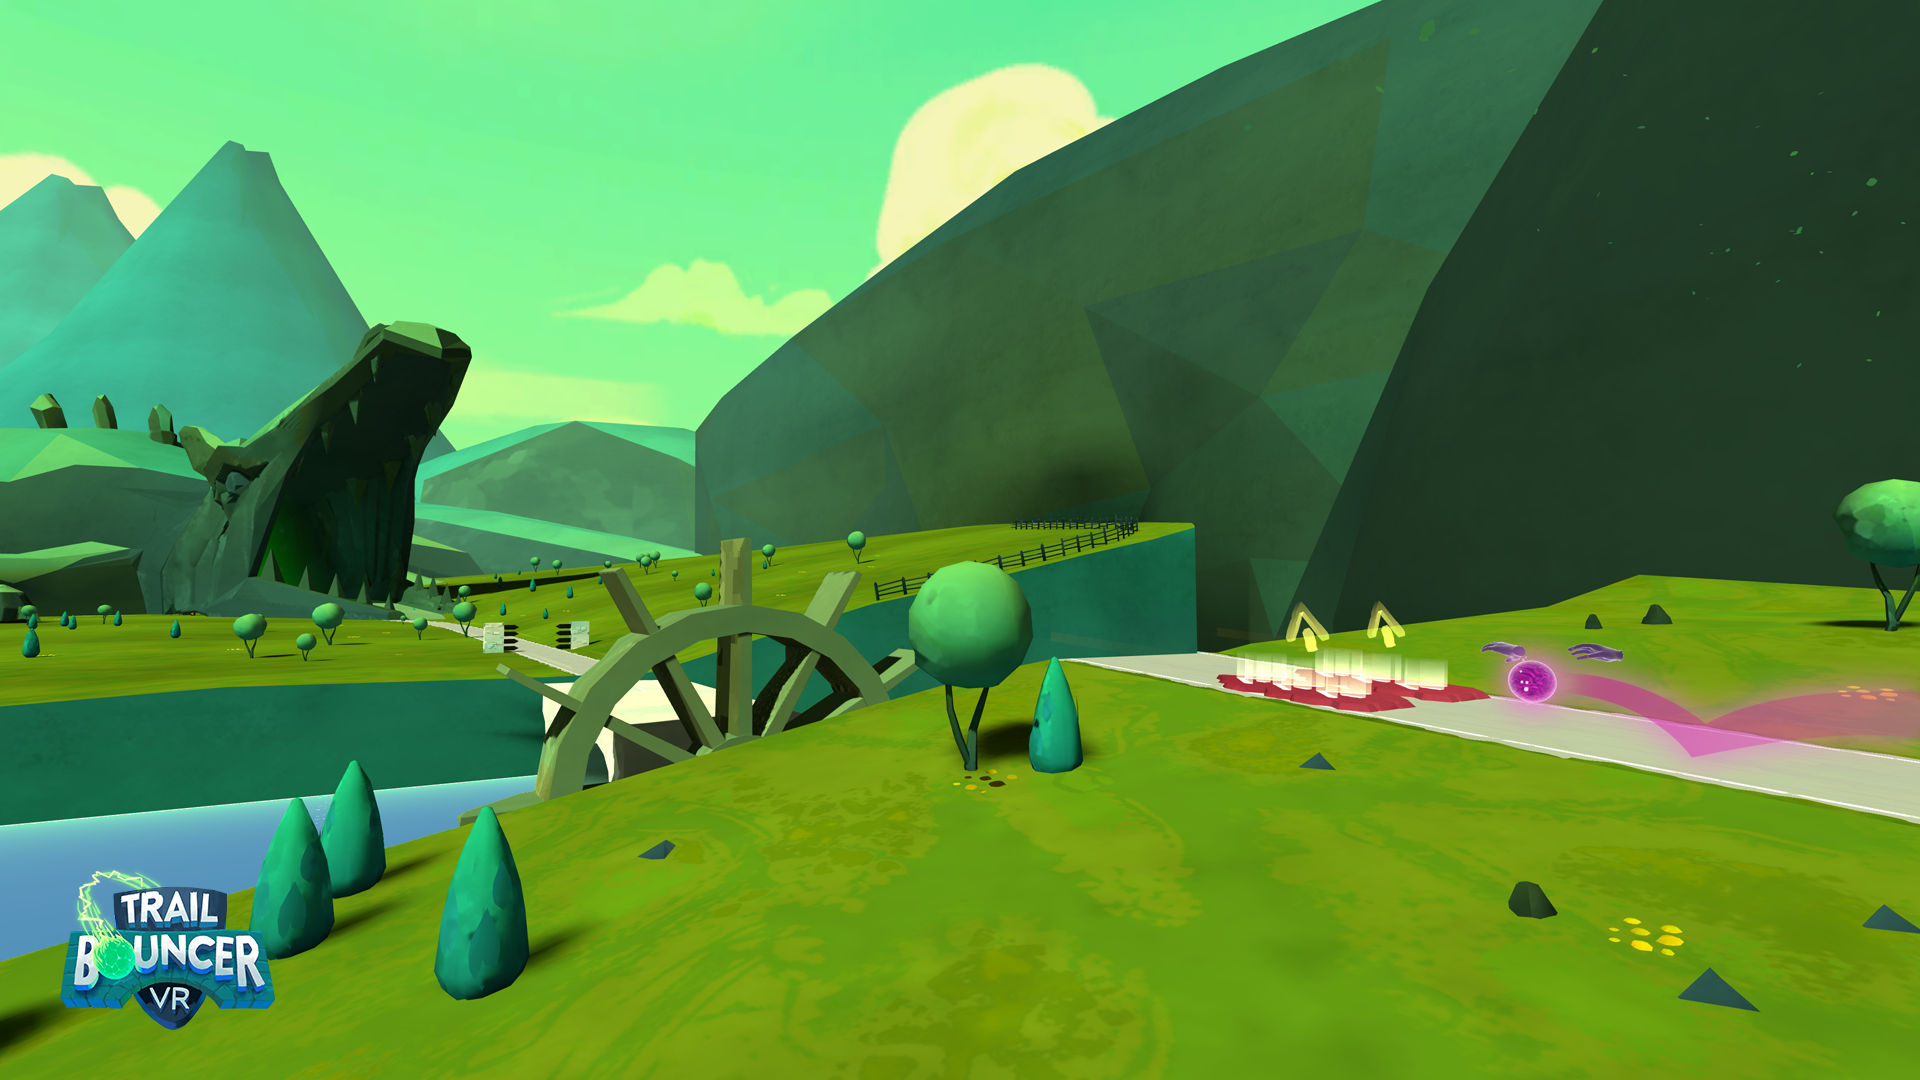 Ingame Screenshot from TrailBouncer VR